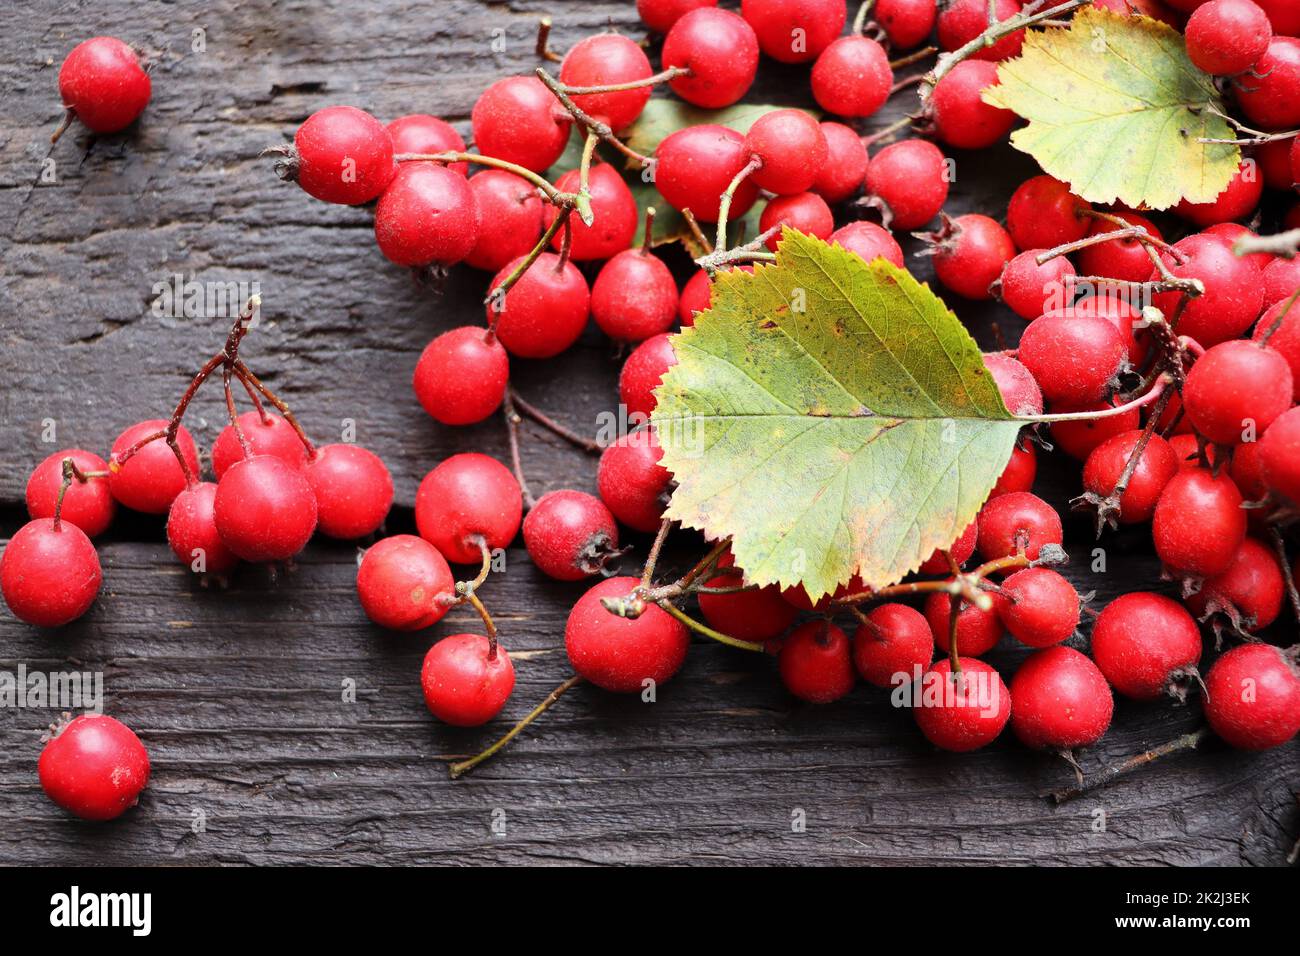 Ripe hawthorn berries, hawthorn branches on wooden background. Useful medicinal plants Stock Photo